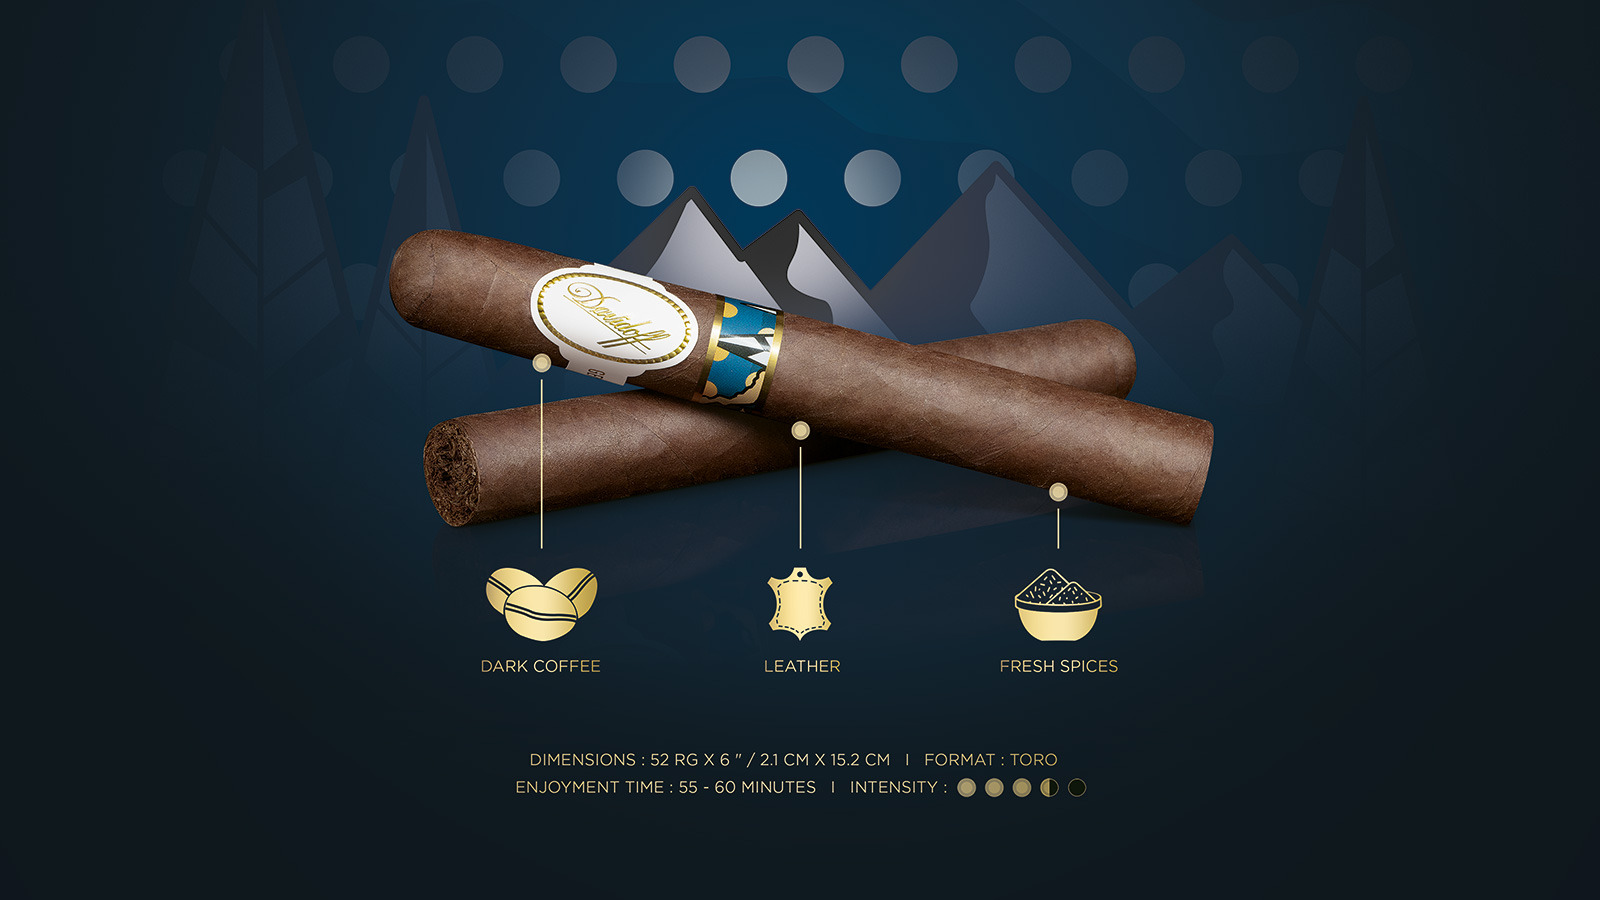 Two toro cigars which come with the Davidoff & Boyarde Masterpiece Humidor Elementary with blend details displayed, such as main aromas, enjoyment time and intensity.